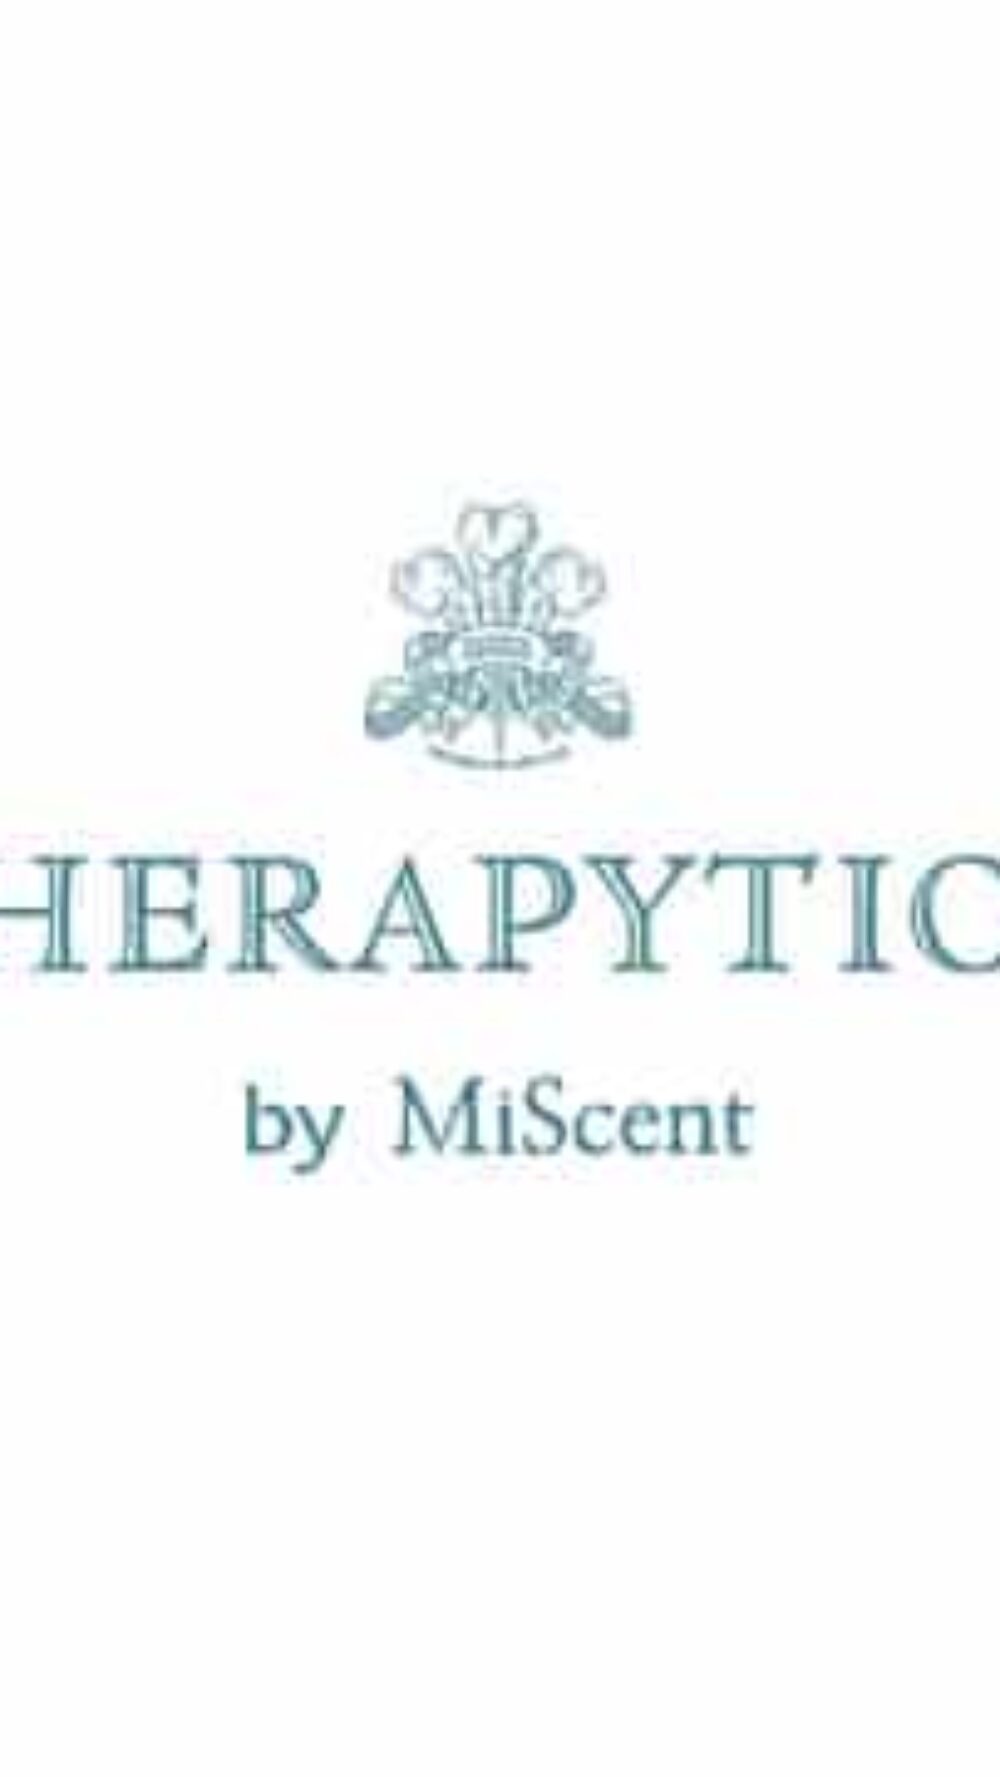 therapytion